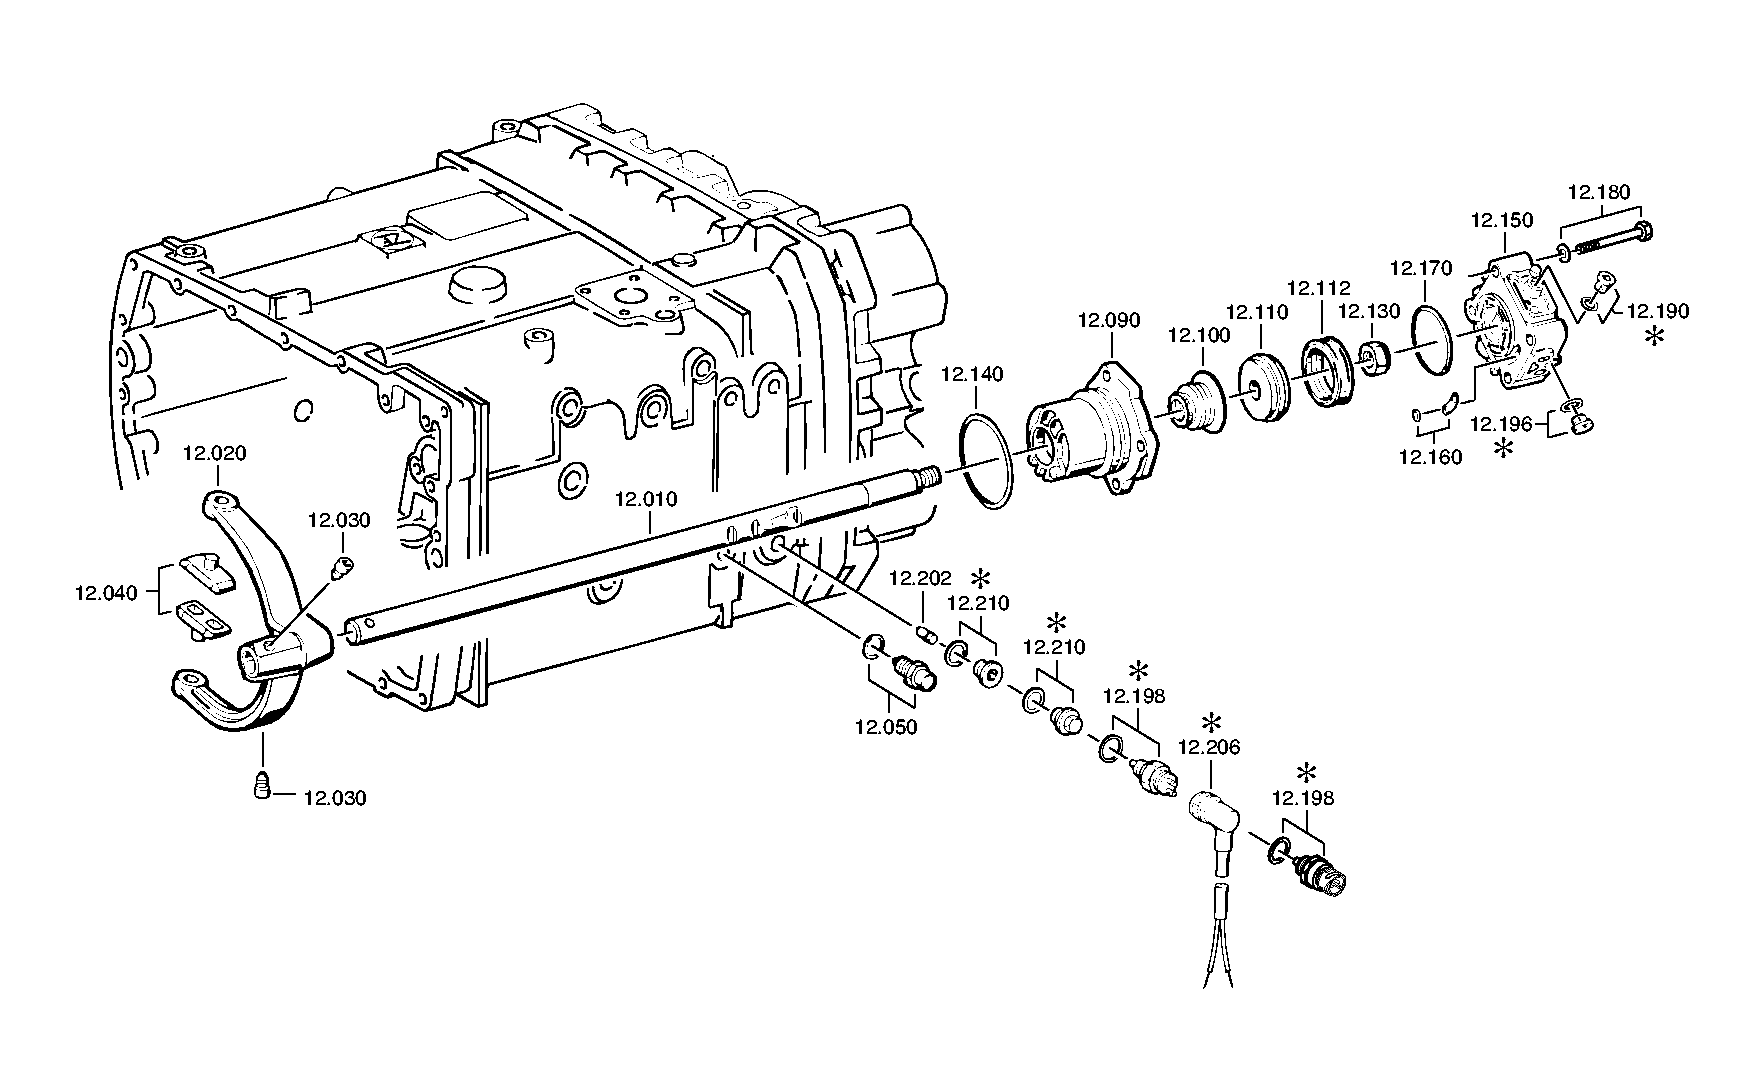 drawing for DAF 692684 - 5/2 WAY VALVE